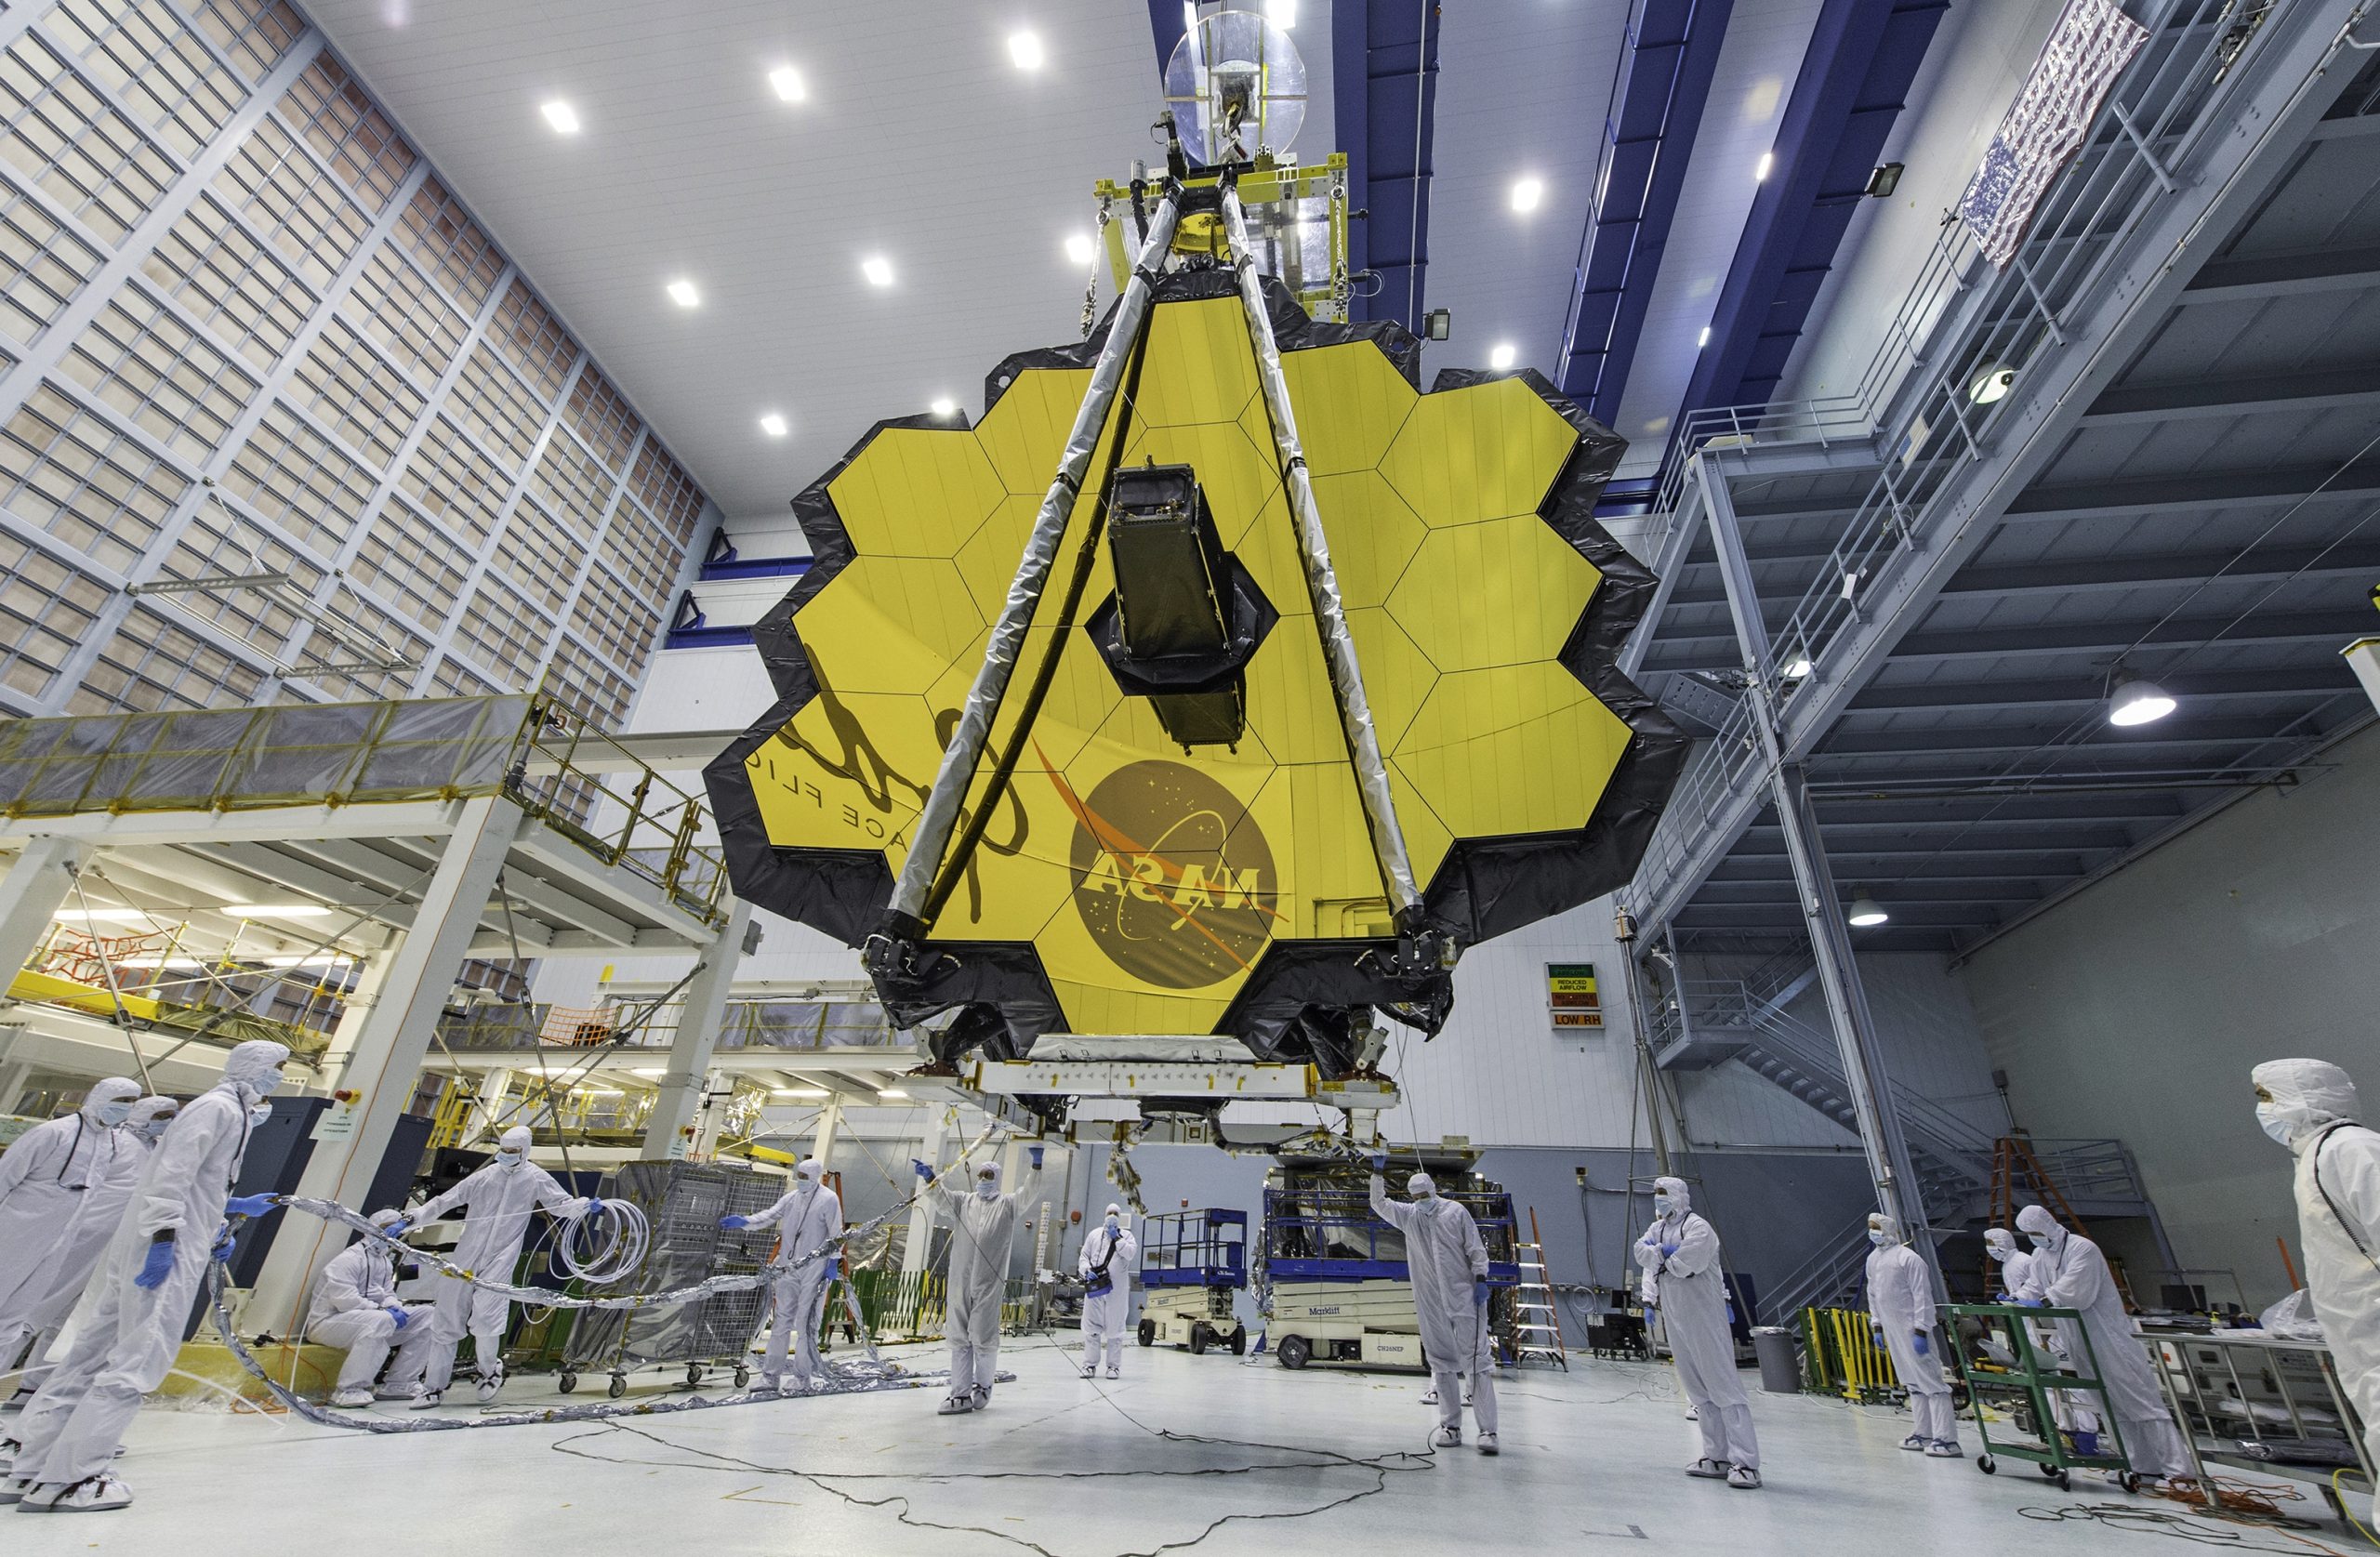 FILE - In this April 13, 2017 file photo provided by NASA, technicians lift the mirror of the James Webb Space Telescope using a crane at the Goddard Space Flight Center in Greenbelt, Md. The telescope's 18-segmented gold mirror is specially designed to capture infrared light from the first galaxies that formed in the early universe. (Laura Betz/NASA via AP, File) | DeviceDaily.com